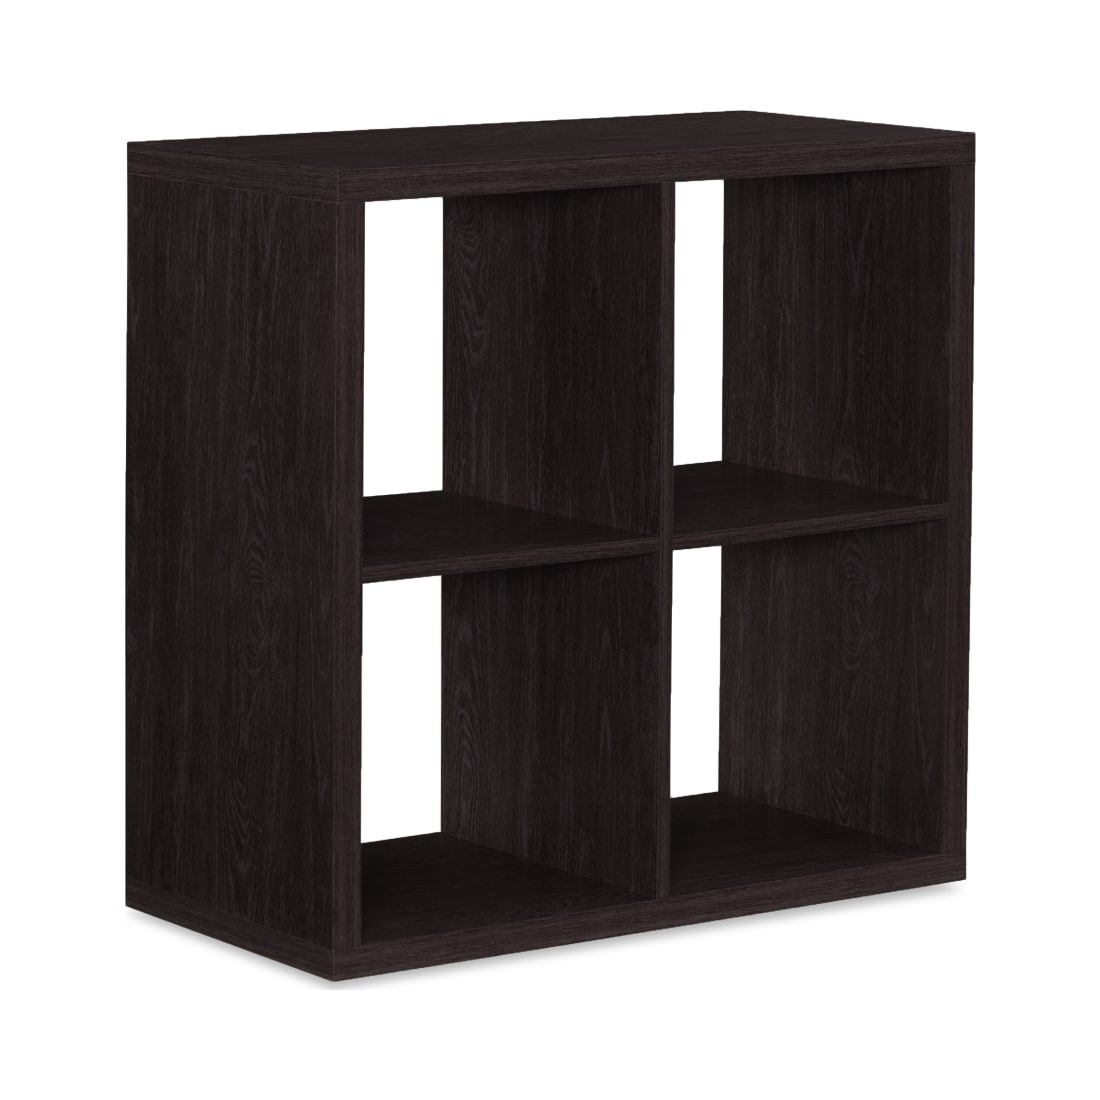 Kinne Collection Espresso 4 Cubby Storage Cabinet